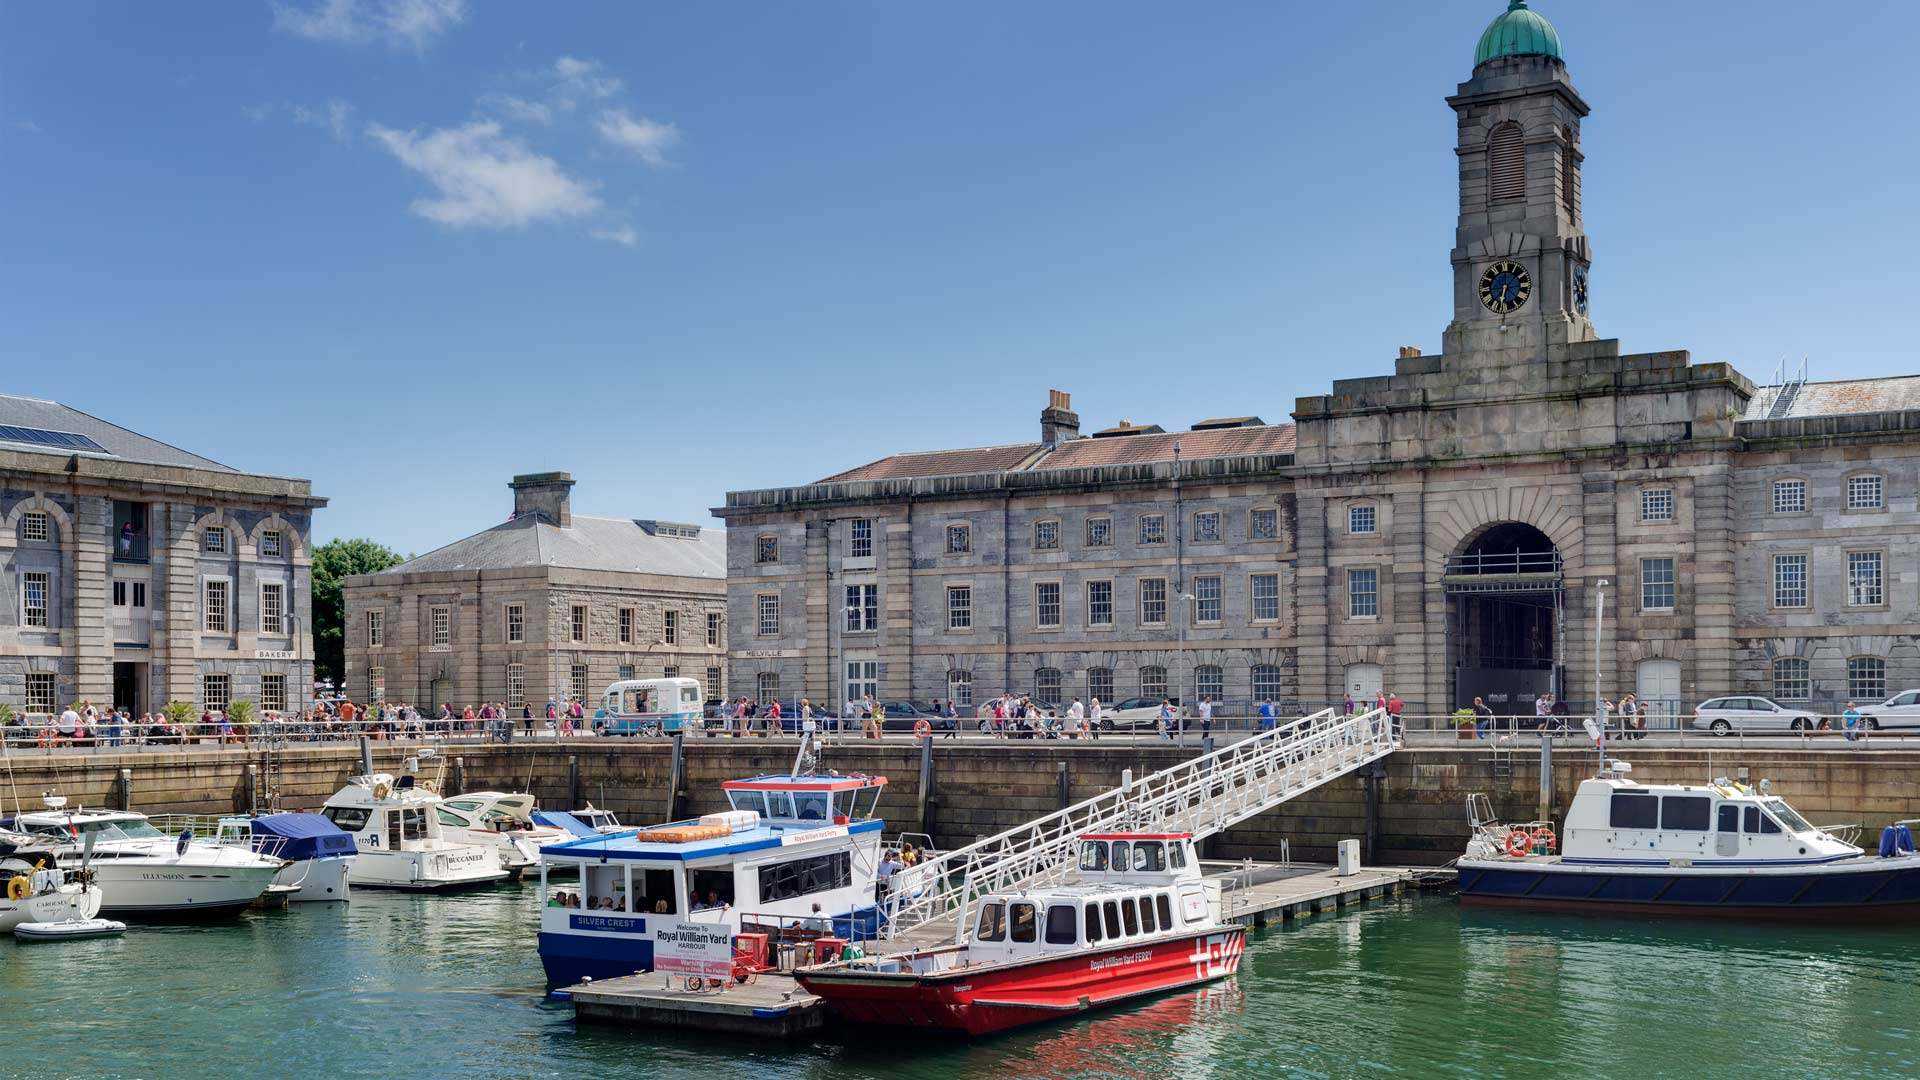 URBAN SPLASH ATTRACTS NATIONAL OPERATORS TO ROYAL WILLIAM YARD IN PLYMOUTH